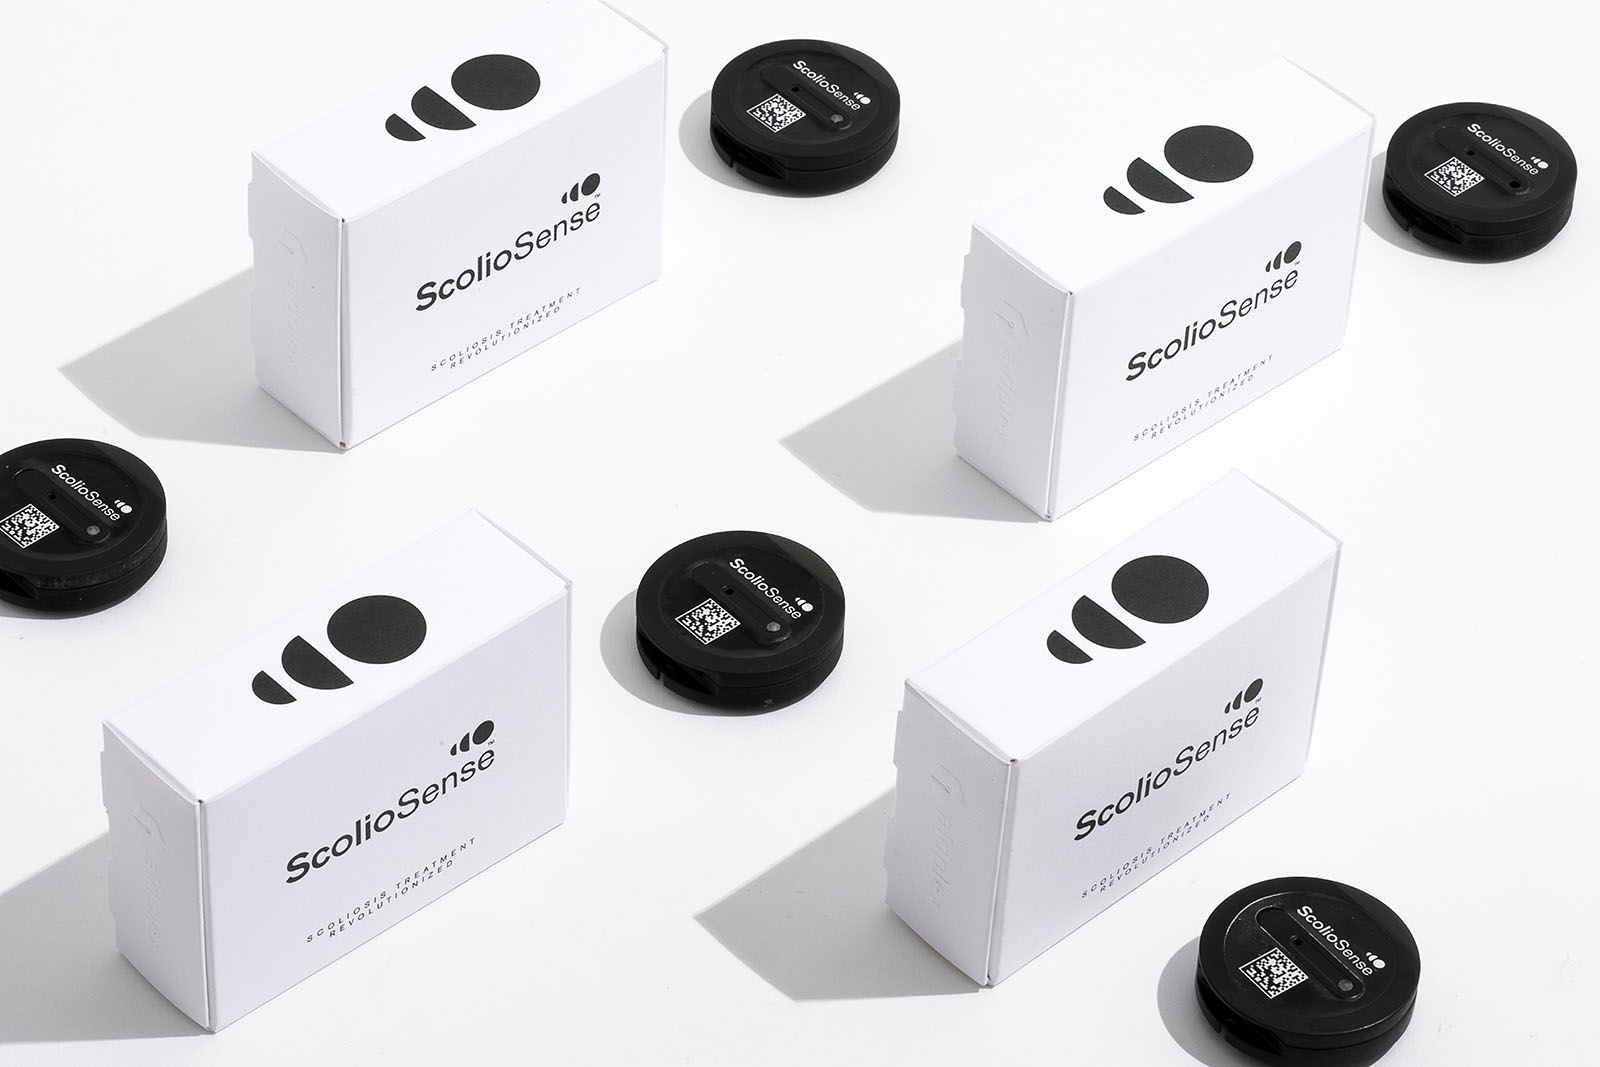 Kemosabe Studio Designs Elegant and Functional Packaging for ScolioSense Wearable Device